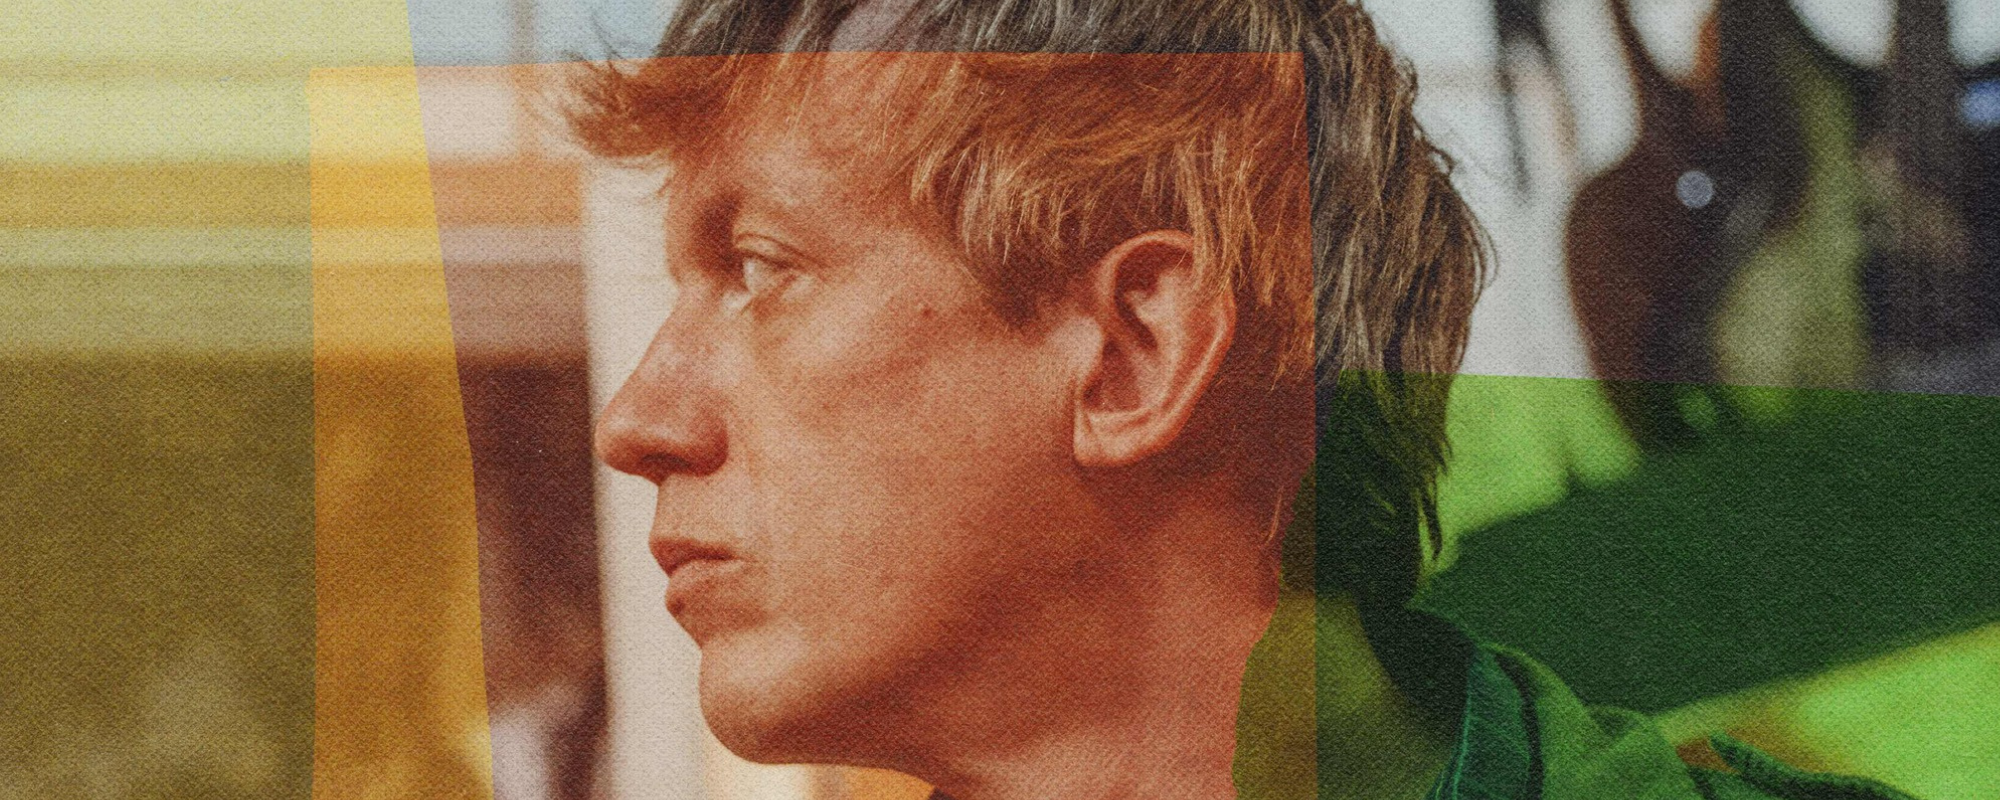 Steve Gunn Learns to Trust Himself Again, Revealing the ‘Other You’ in His New LP